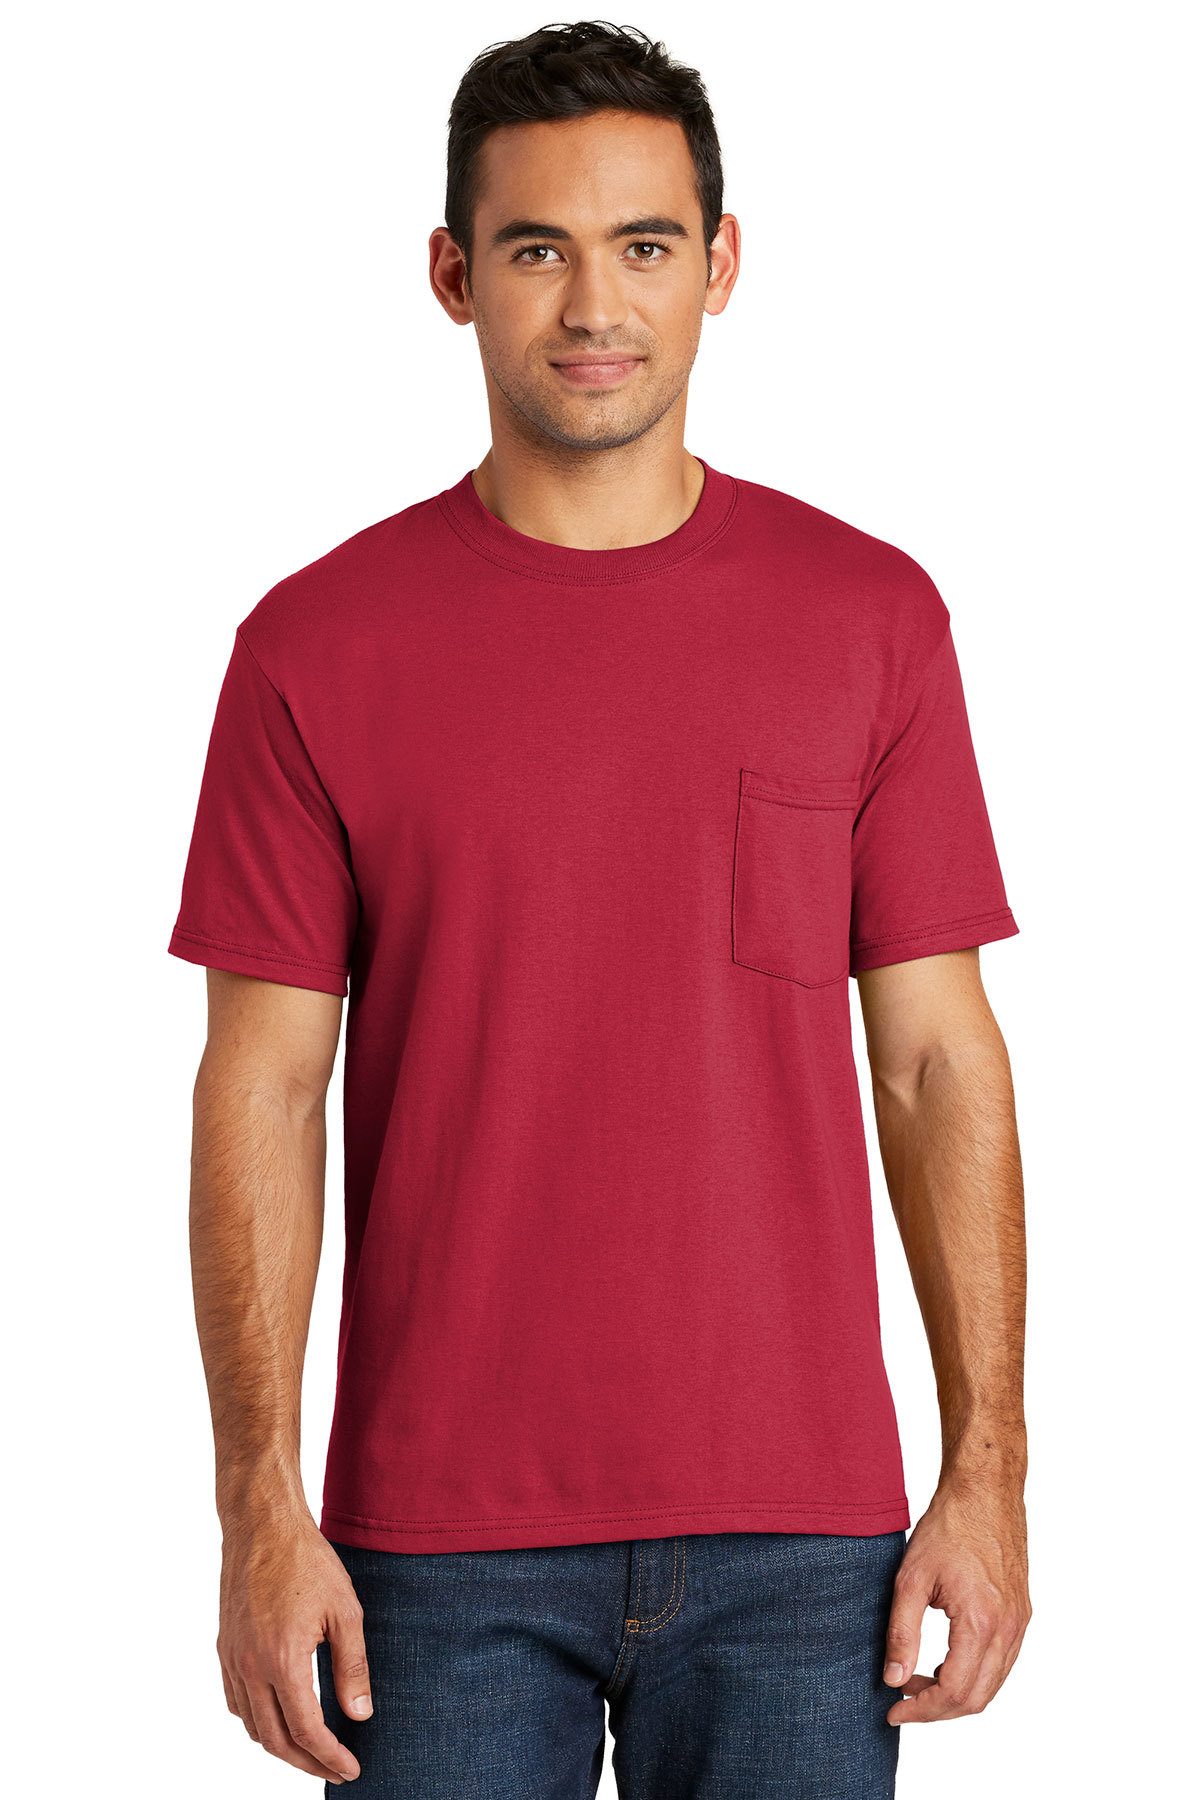 Port & Company All-American Tee, Product